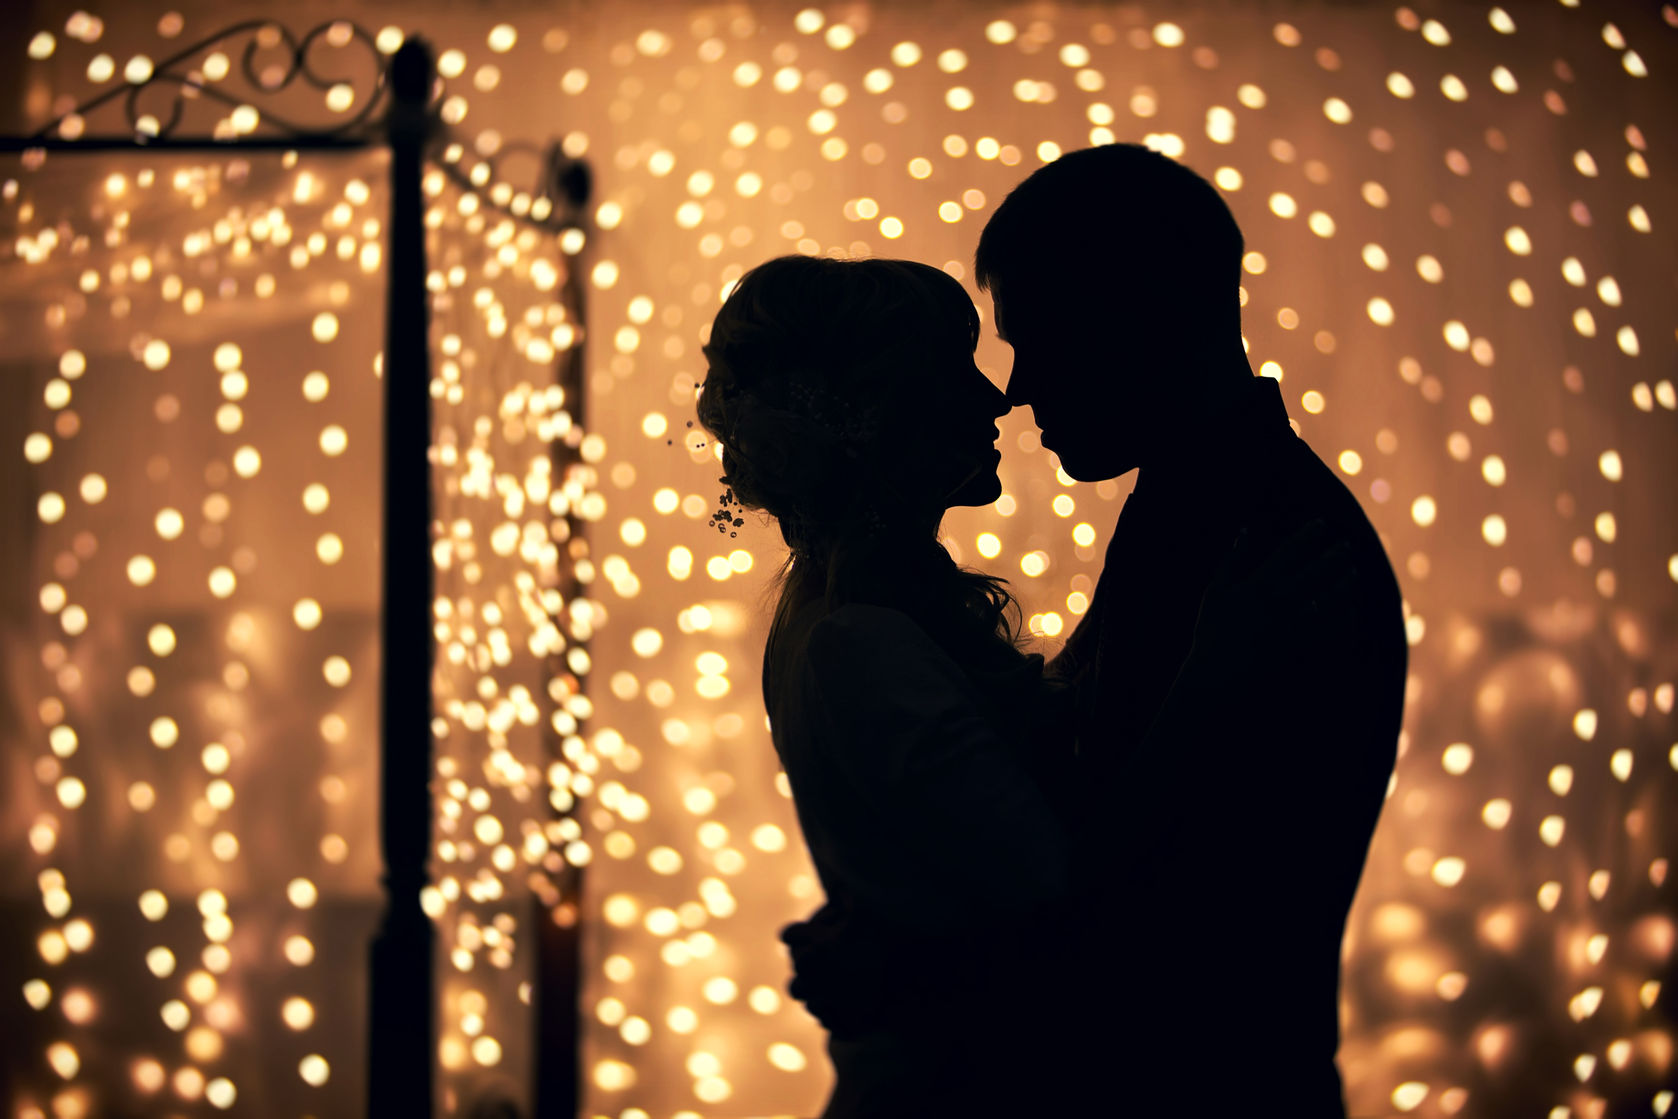 48319615 - hugs lovers in silhouette against the background of garlands of lights